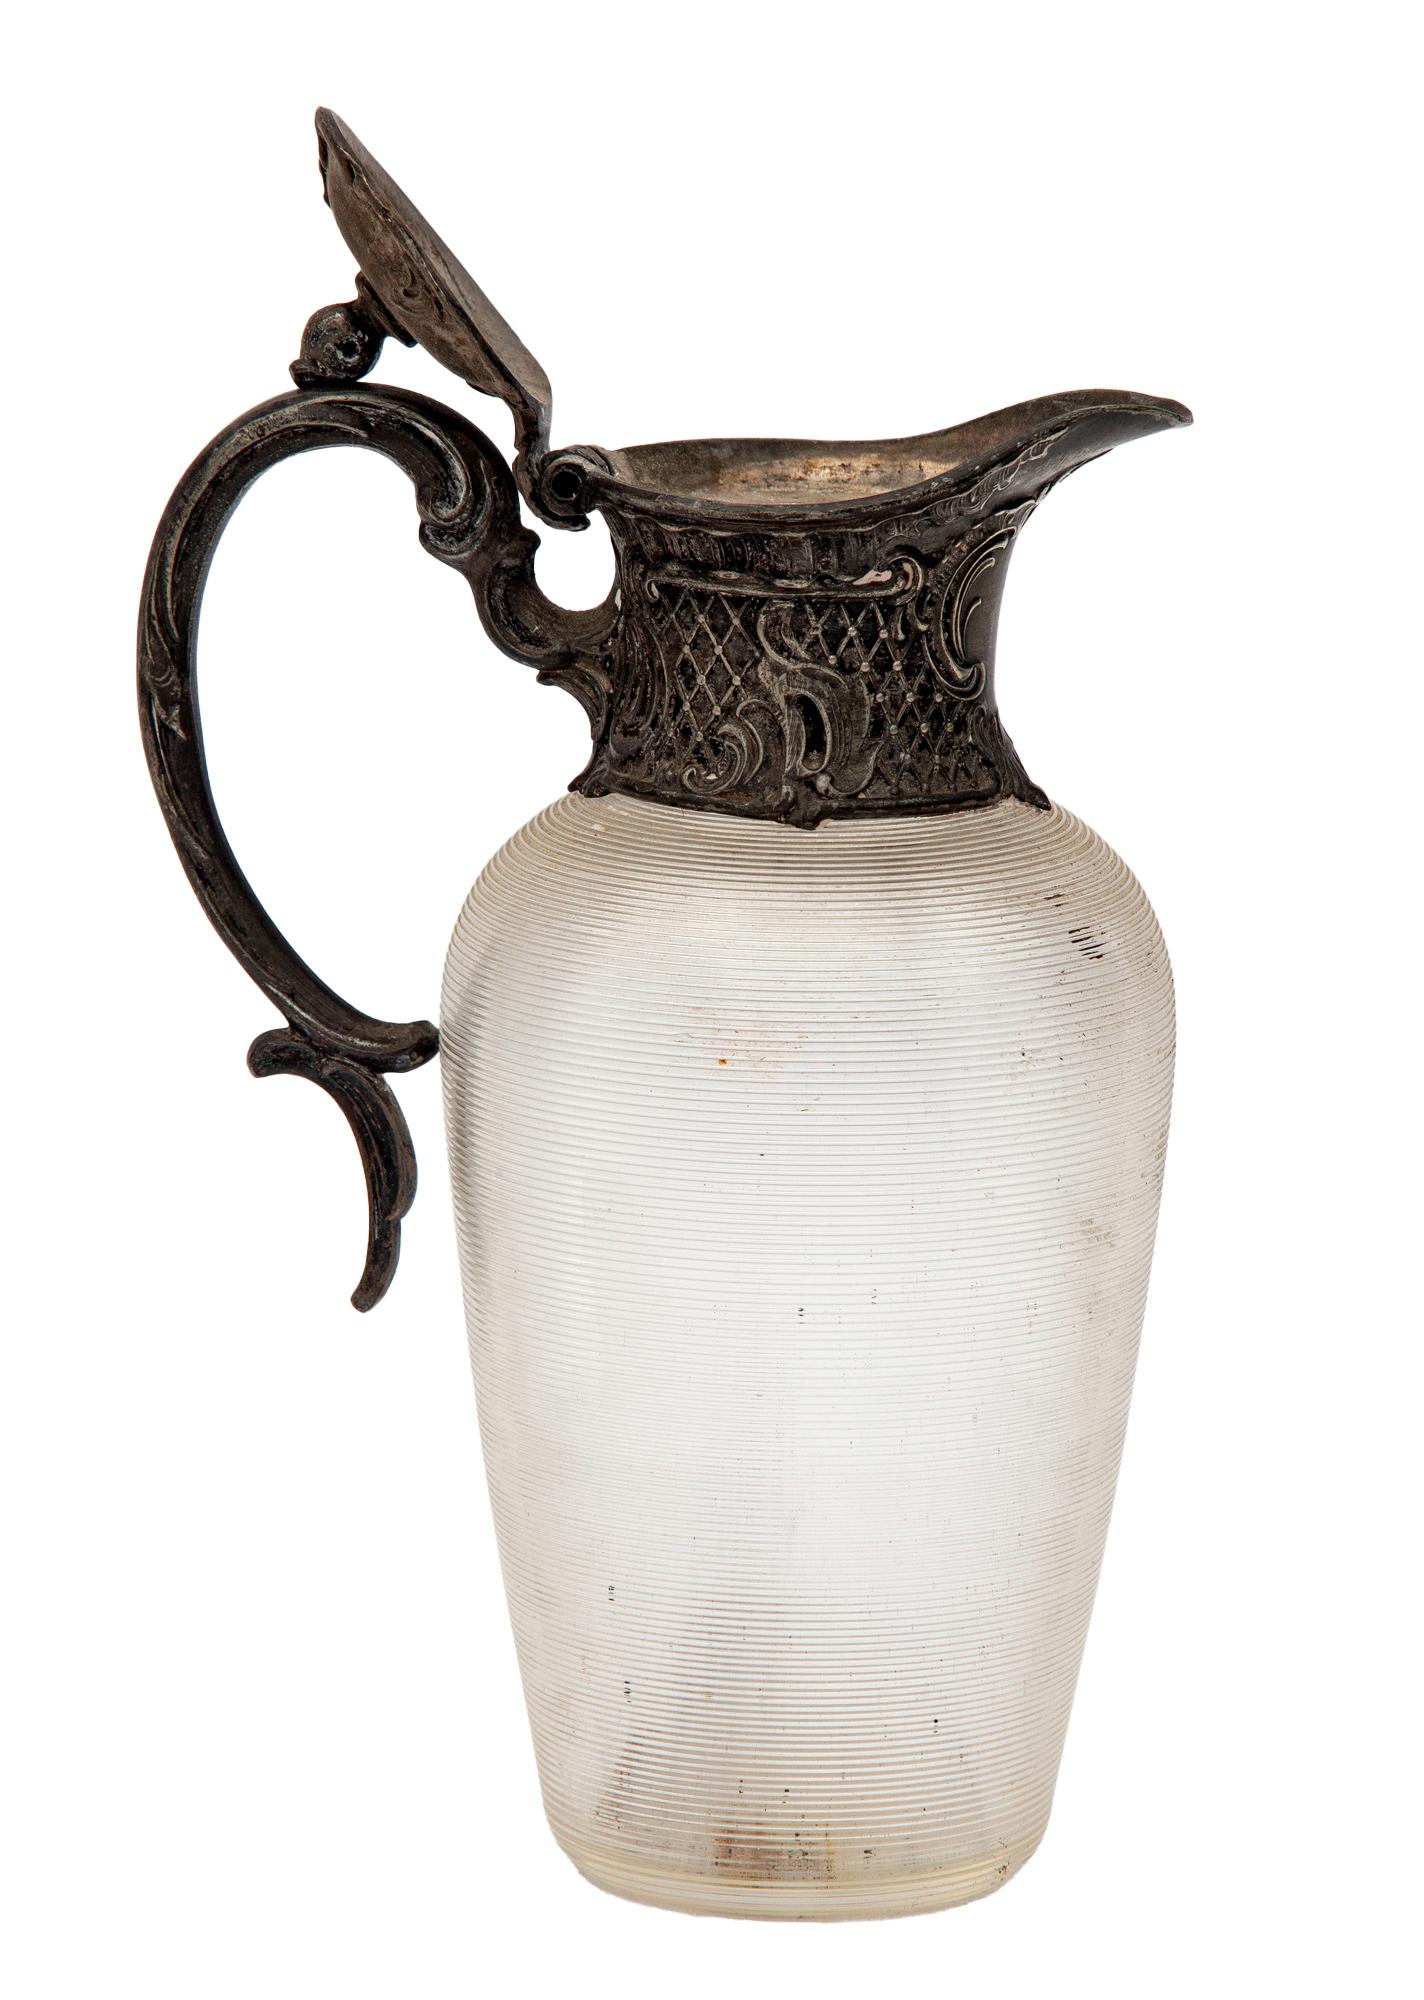 Art Noveau 19th century jug for oil, syrup or display.
The metal work has a French flair.
The crystal is hand etched with a ribbed design.